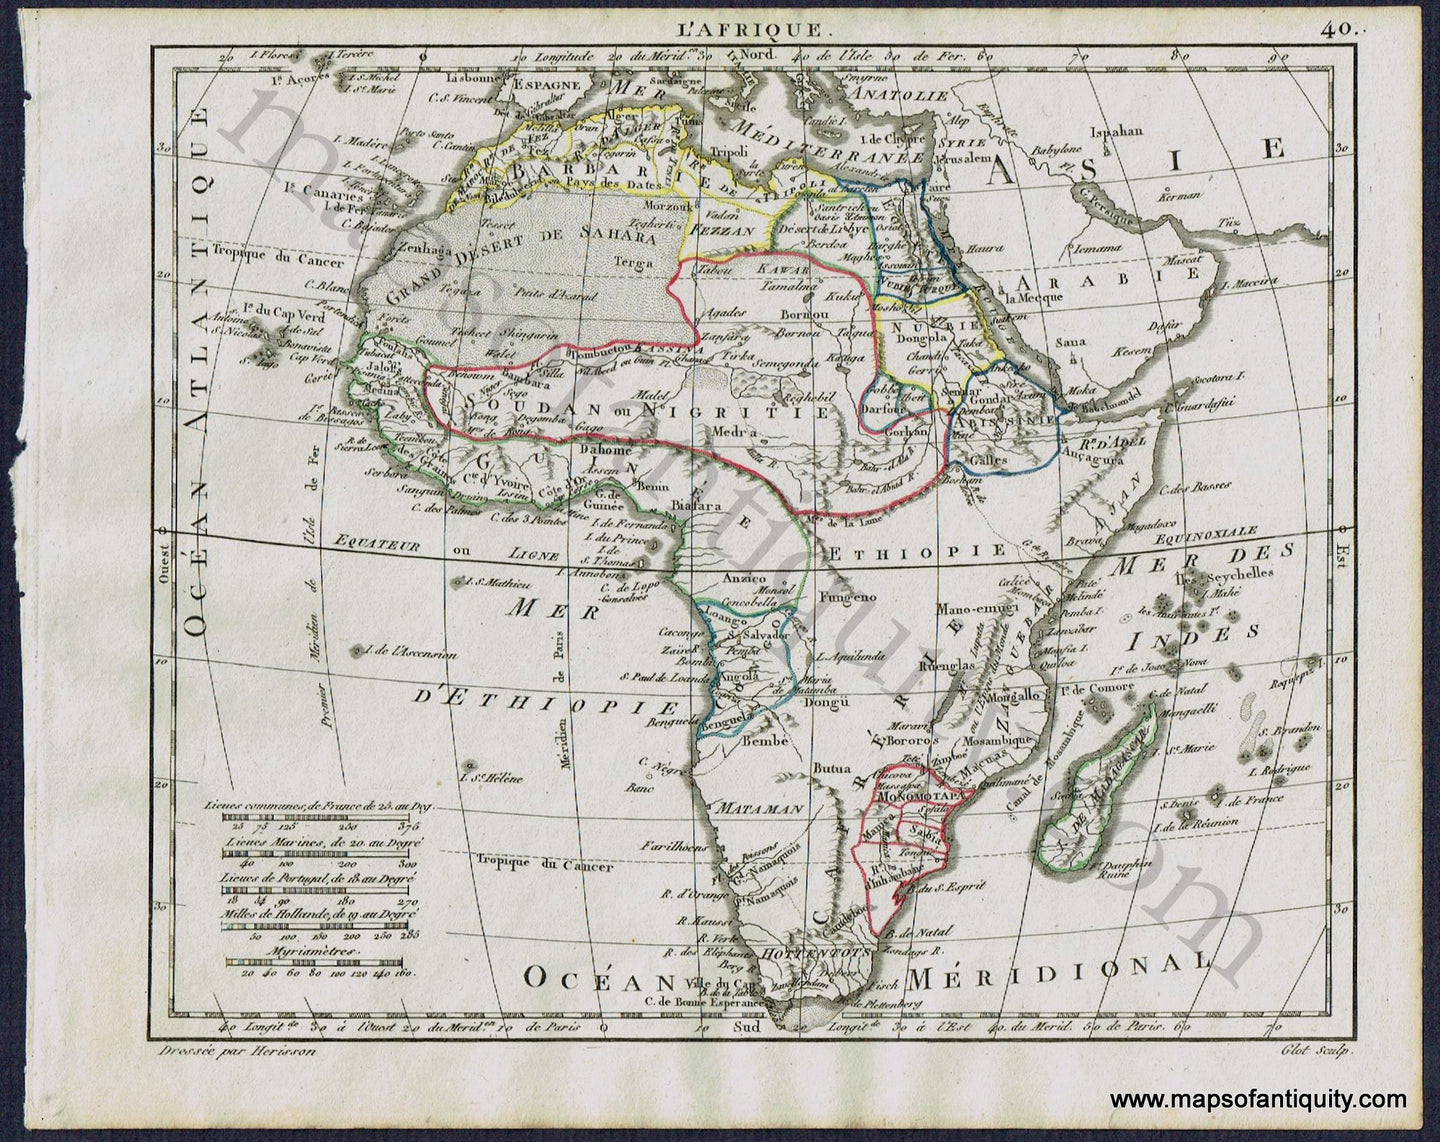 Antique-Map-Africa-L'Afrique-Herrison-French-1806-1800s-Early-19th-Century-Maps-of-Antiquity